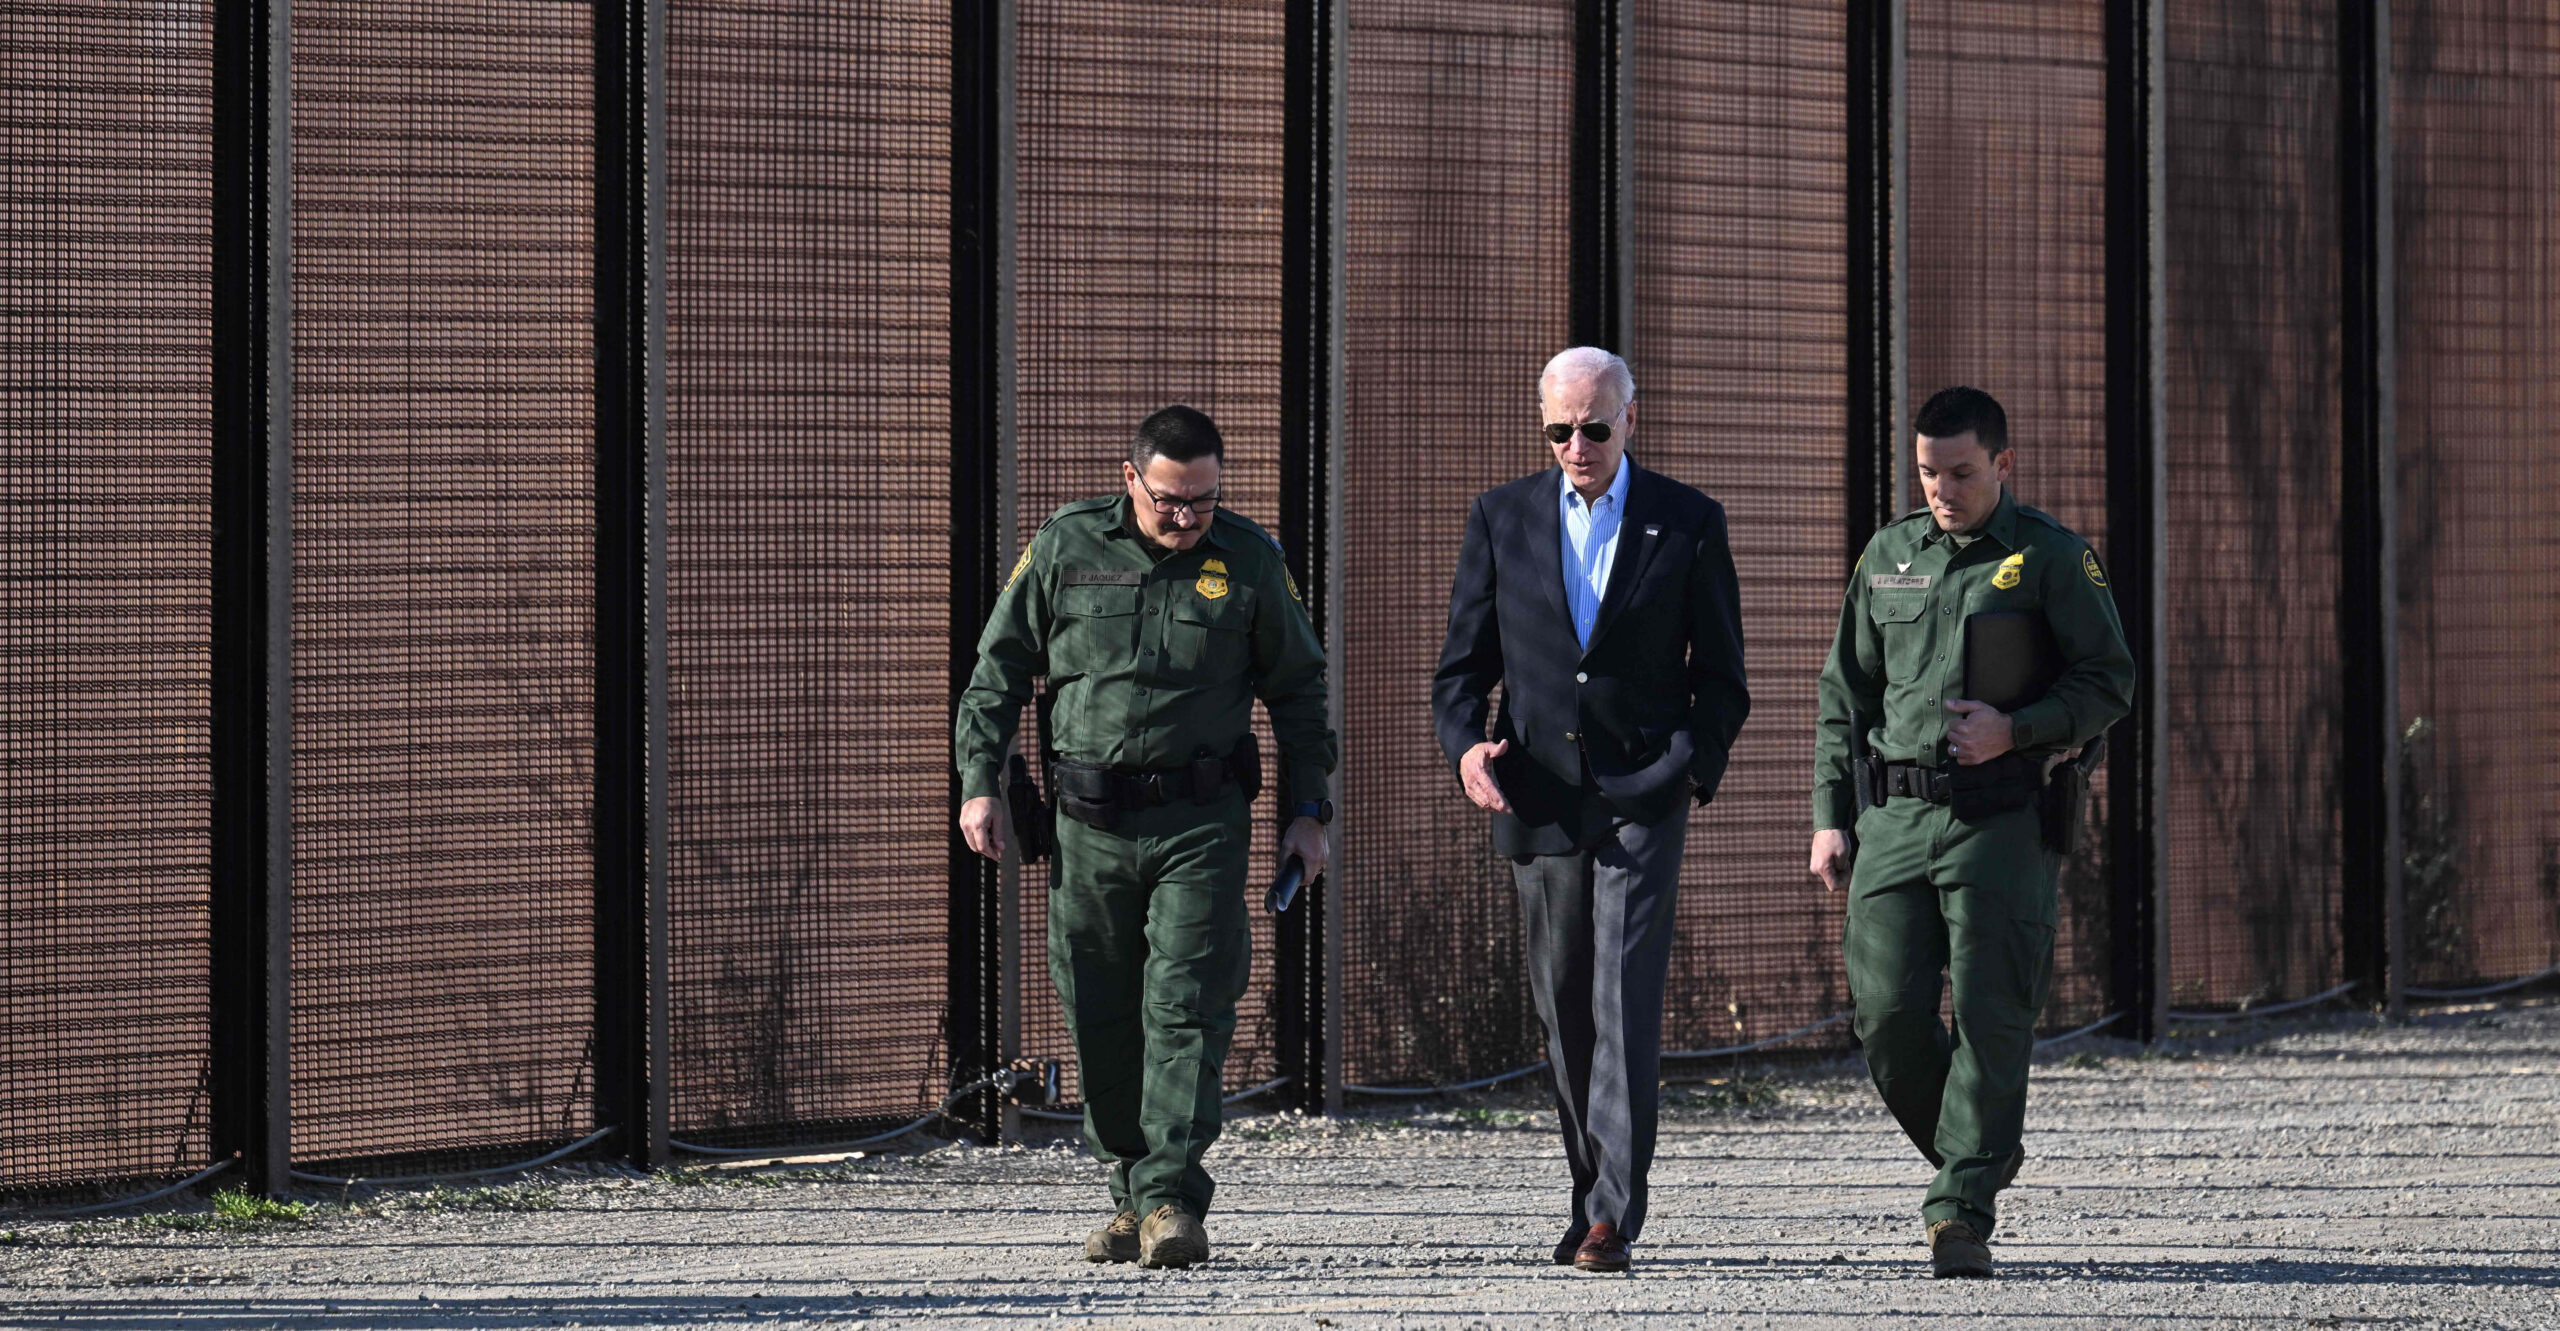 Millions of Illegal Aliens Are Costing Taxpayers Hundreds of Billions. Biden Couldn't Care Less.